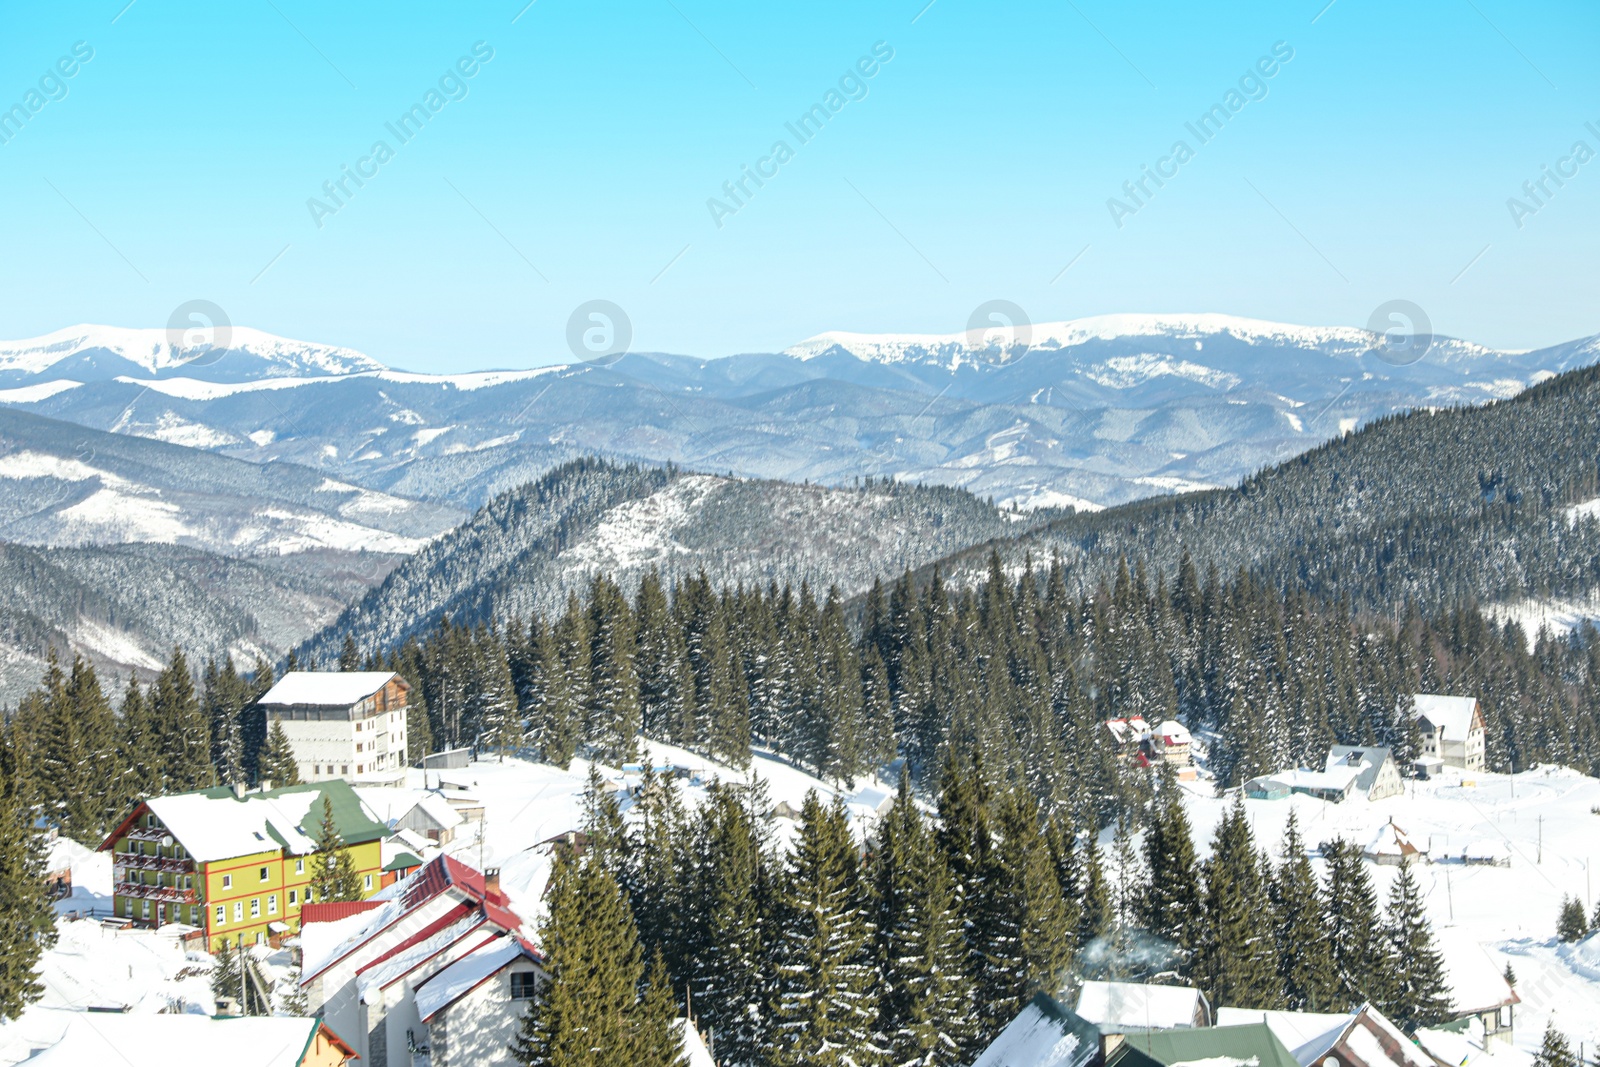 Photo of Modern hotels in snowy mountains on winter day